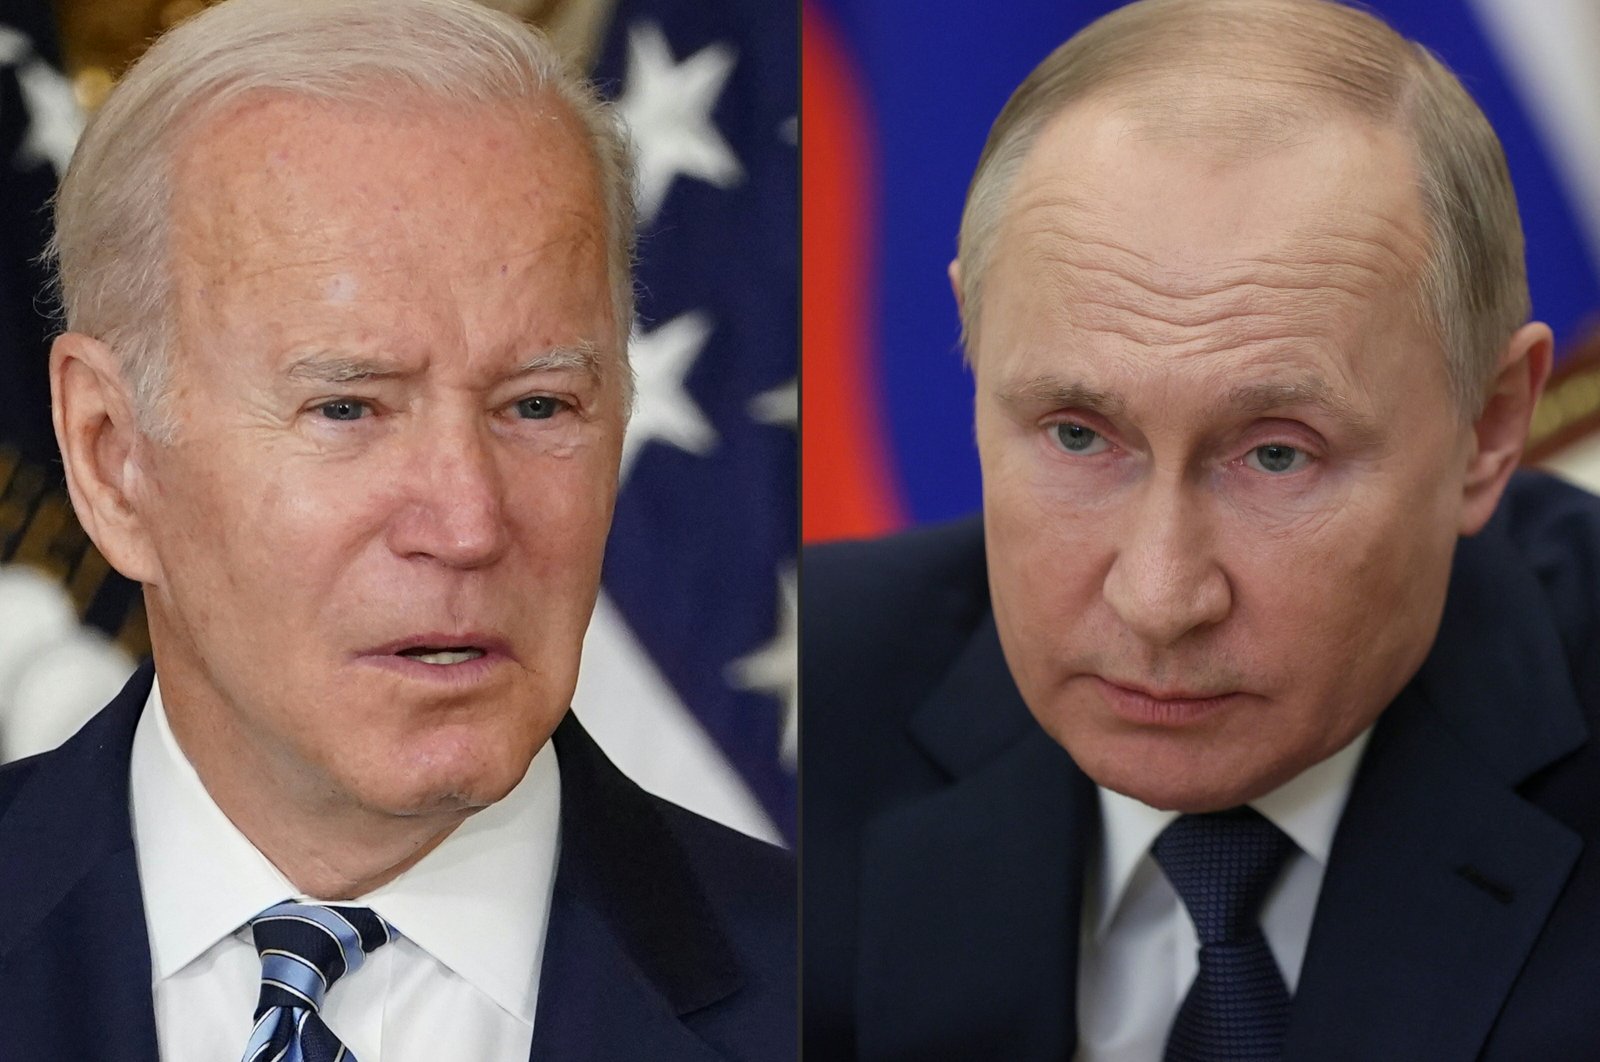 U.S. President Joe Biden  (L) during a signing ceremony at the White House in Washington, D.C., U.S., Nov. 18, 2021, and Russian President Vladimir Putin in a congress of the United Russia party in Moscow, Russia, Dec. 4, 2021, in this combination of pictures created on Dec. 6, 2021. (AFP Photo)